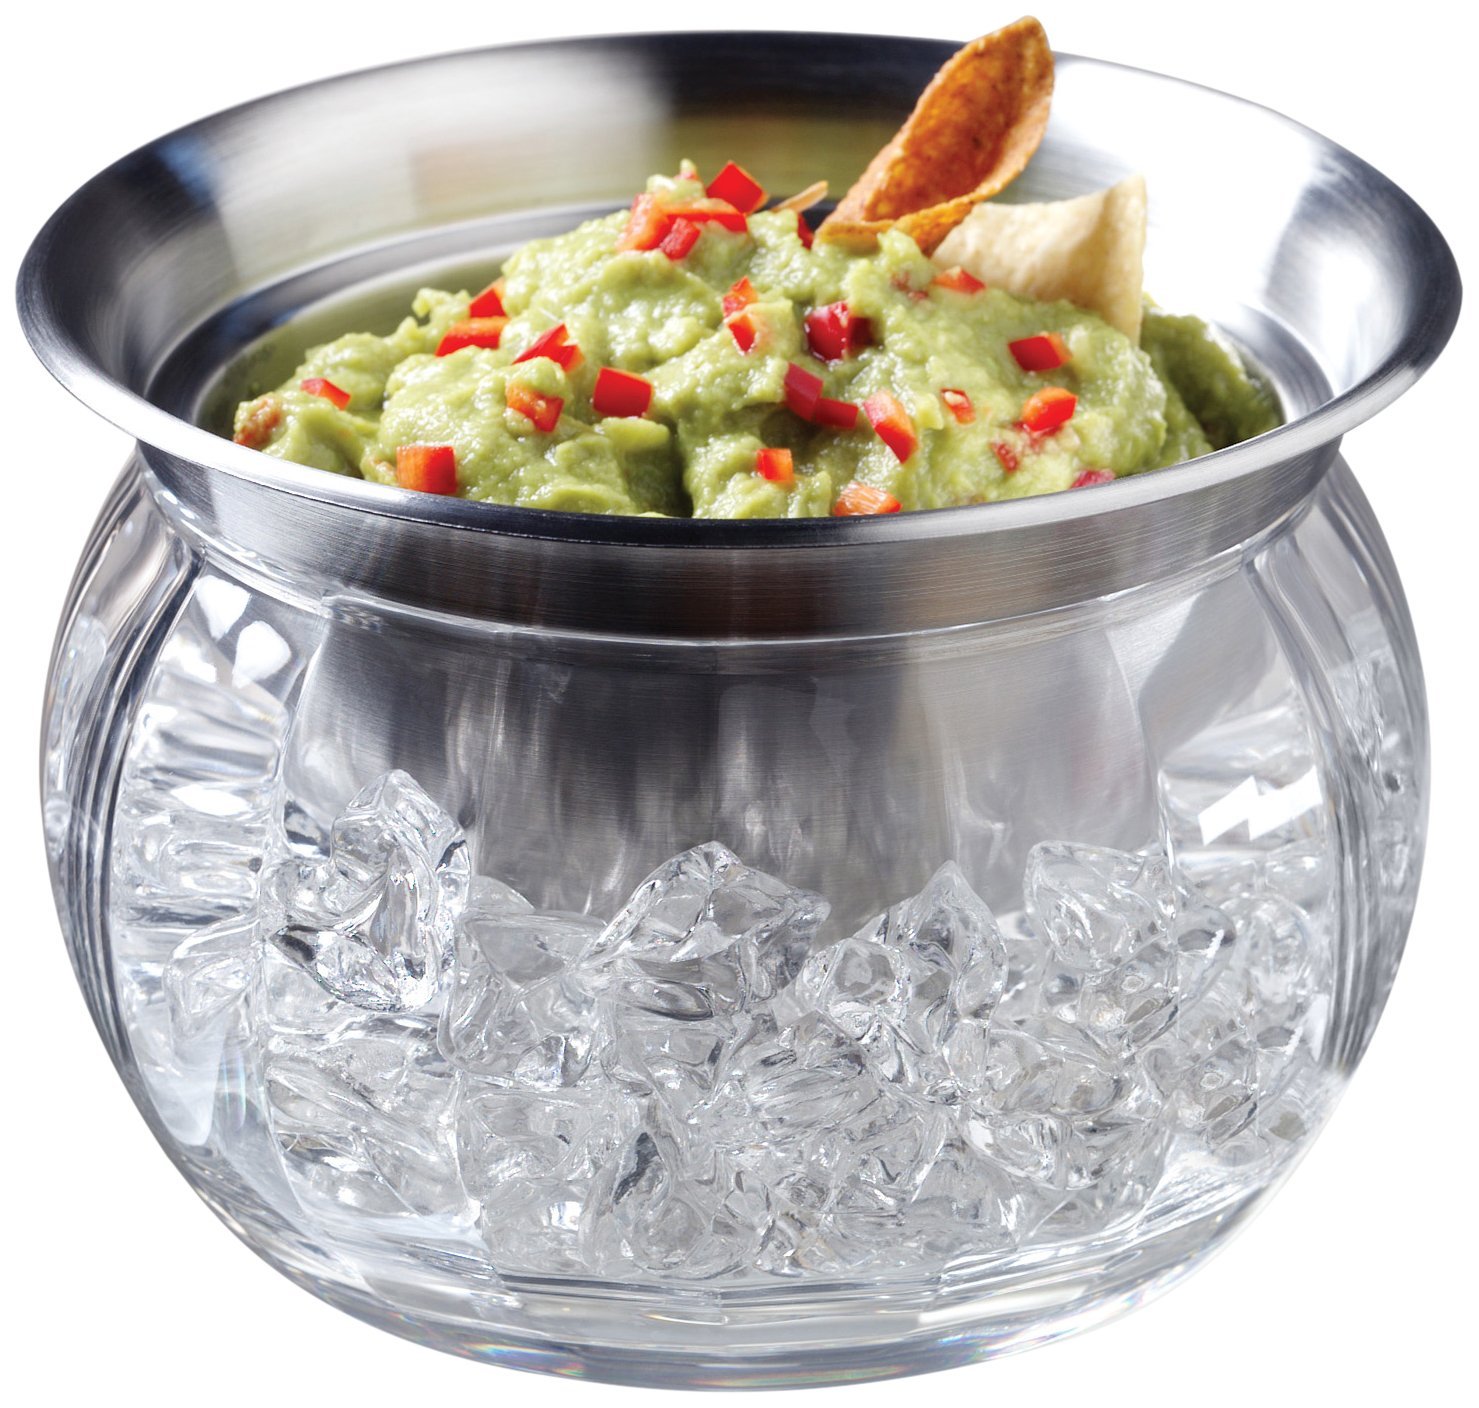 Best Party Bowl Idea EVER - and ICED dip bowl for your party dips